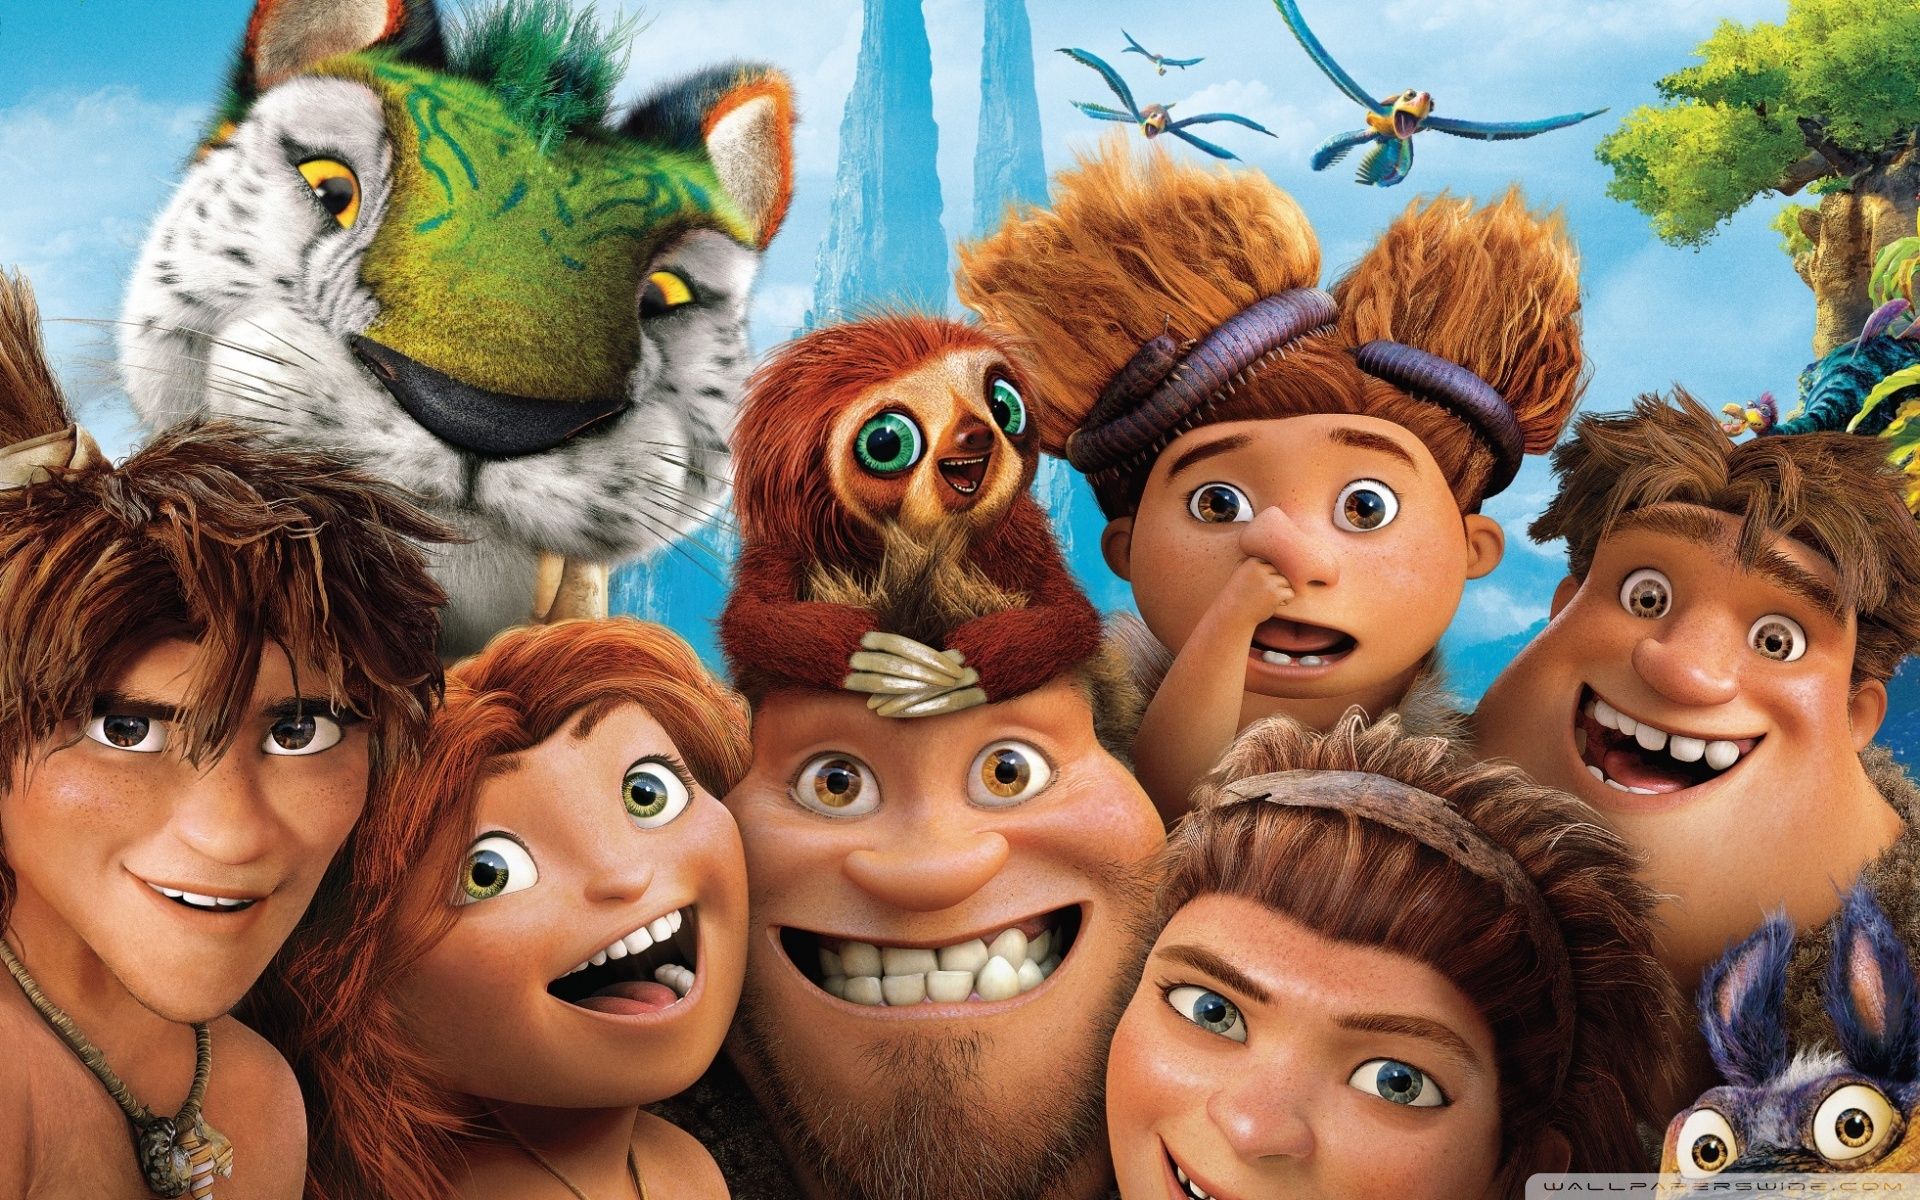 The Croods Characters Ultra HD Desktop Background Wallpaper for 4K